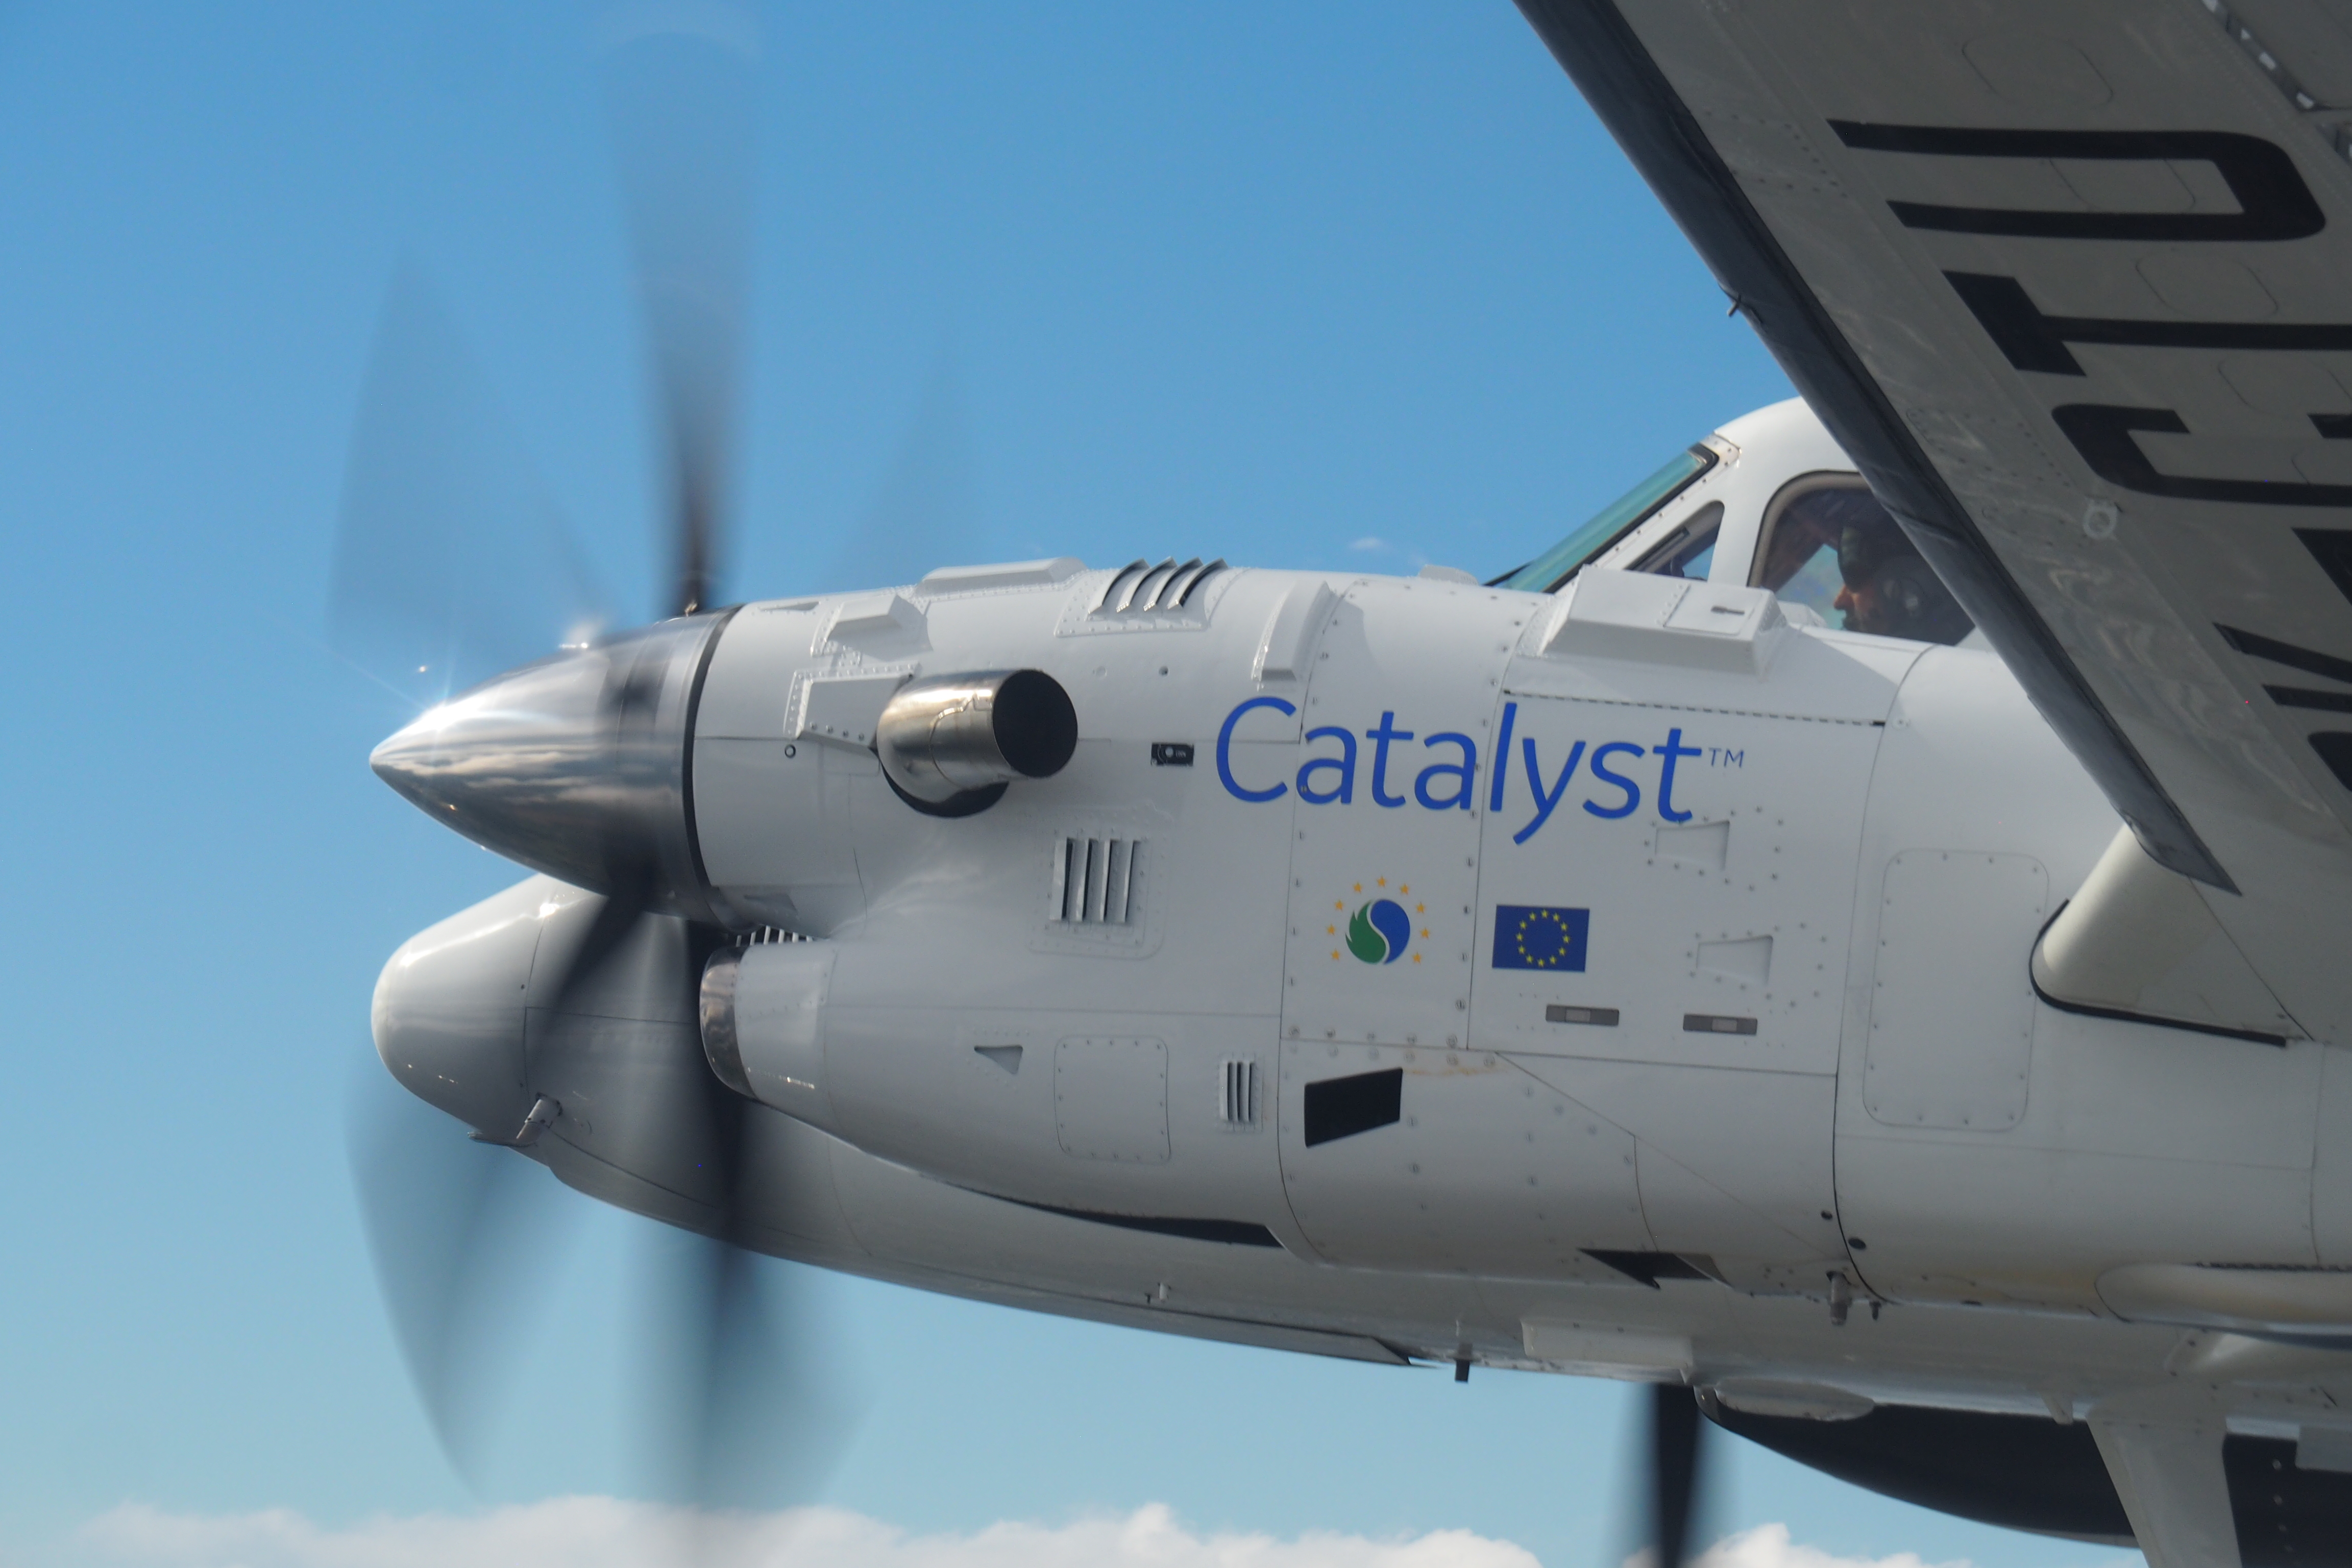 The Catalyst engine in flight on Beechcraft King Air Flying Test Bed